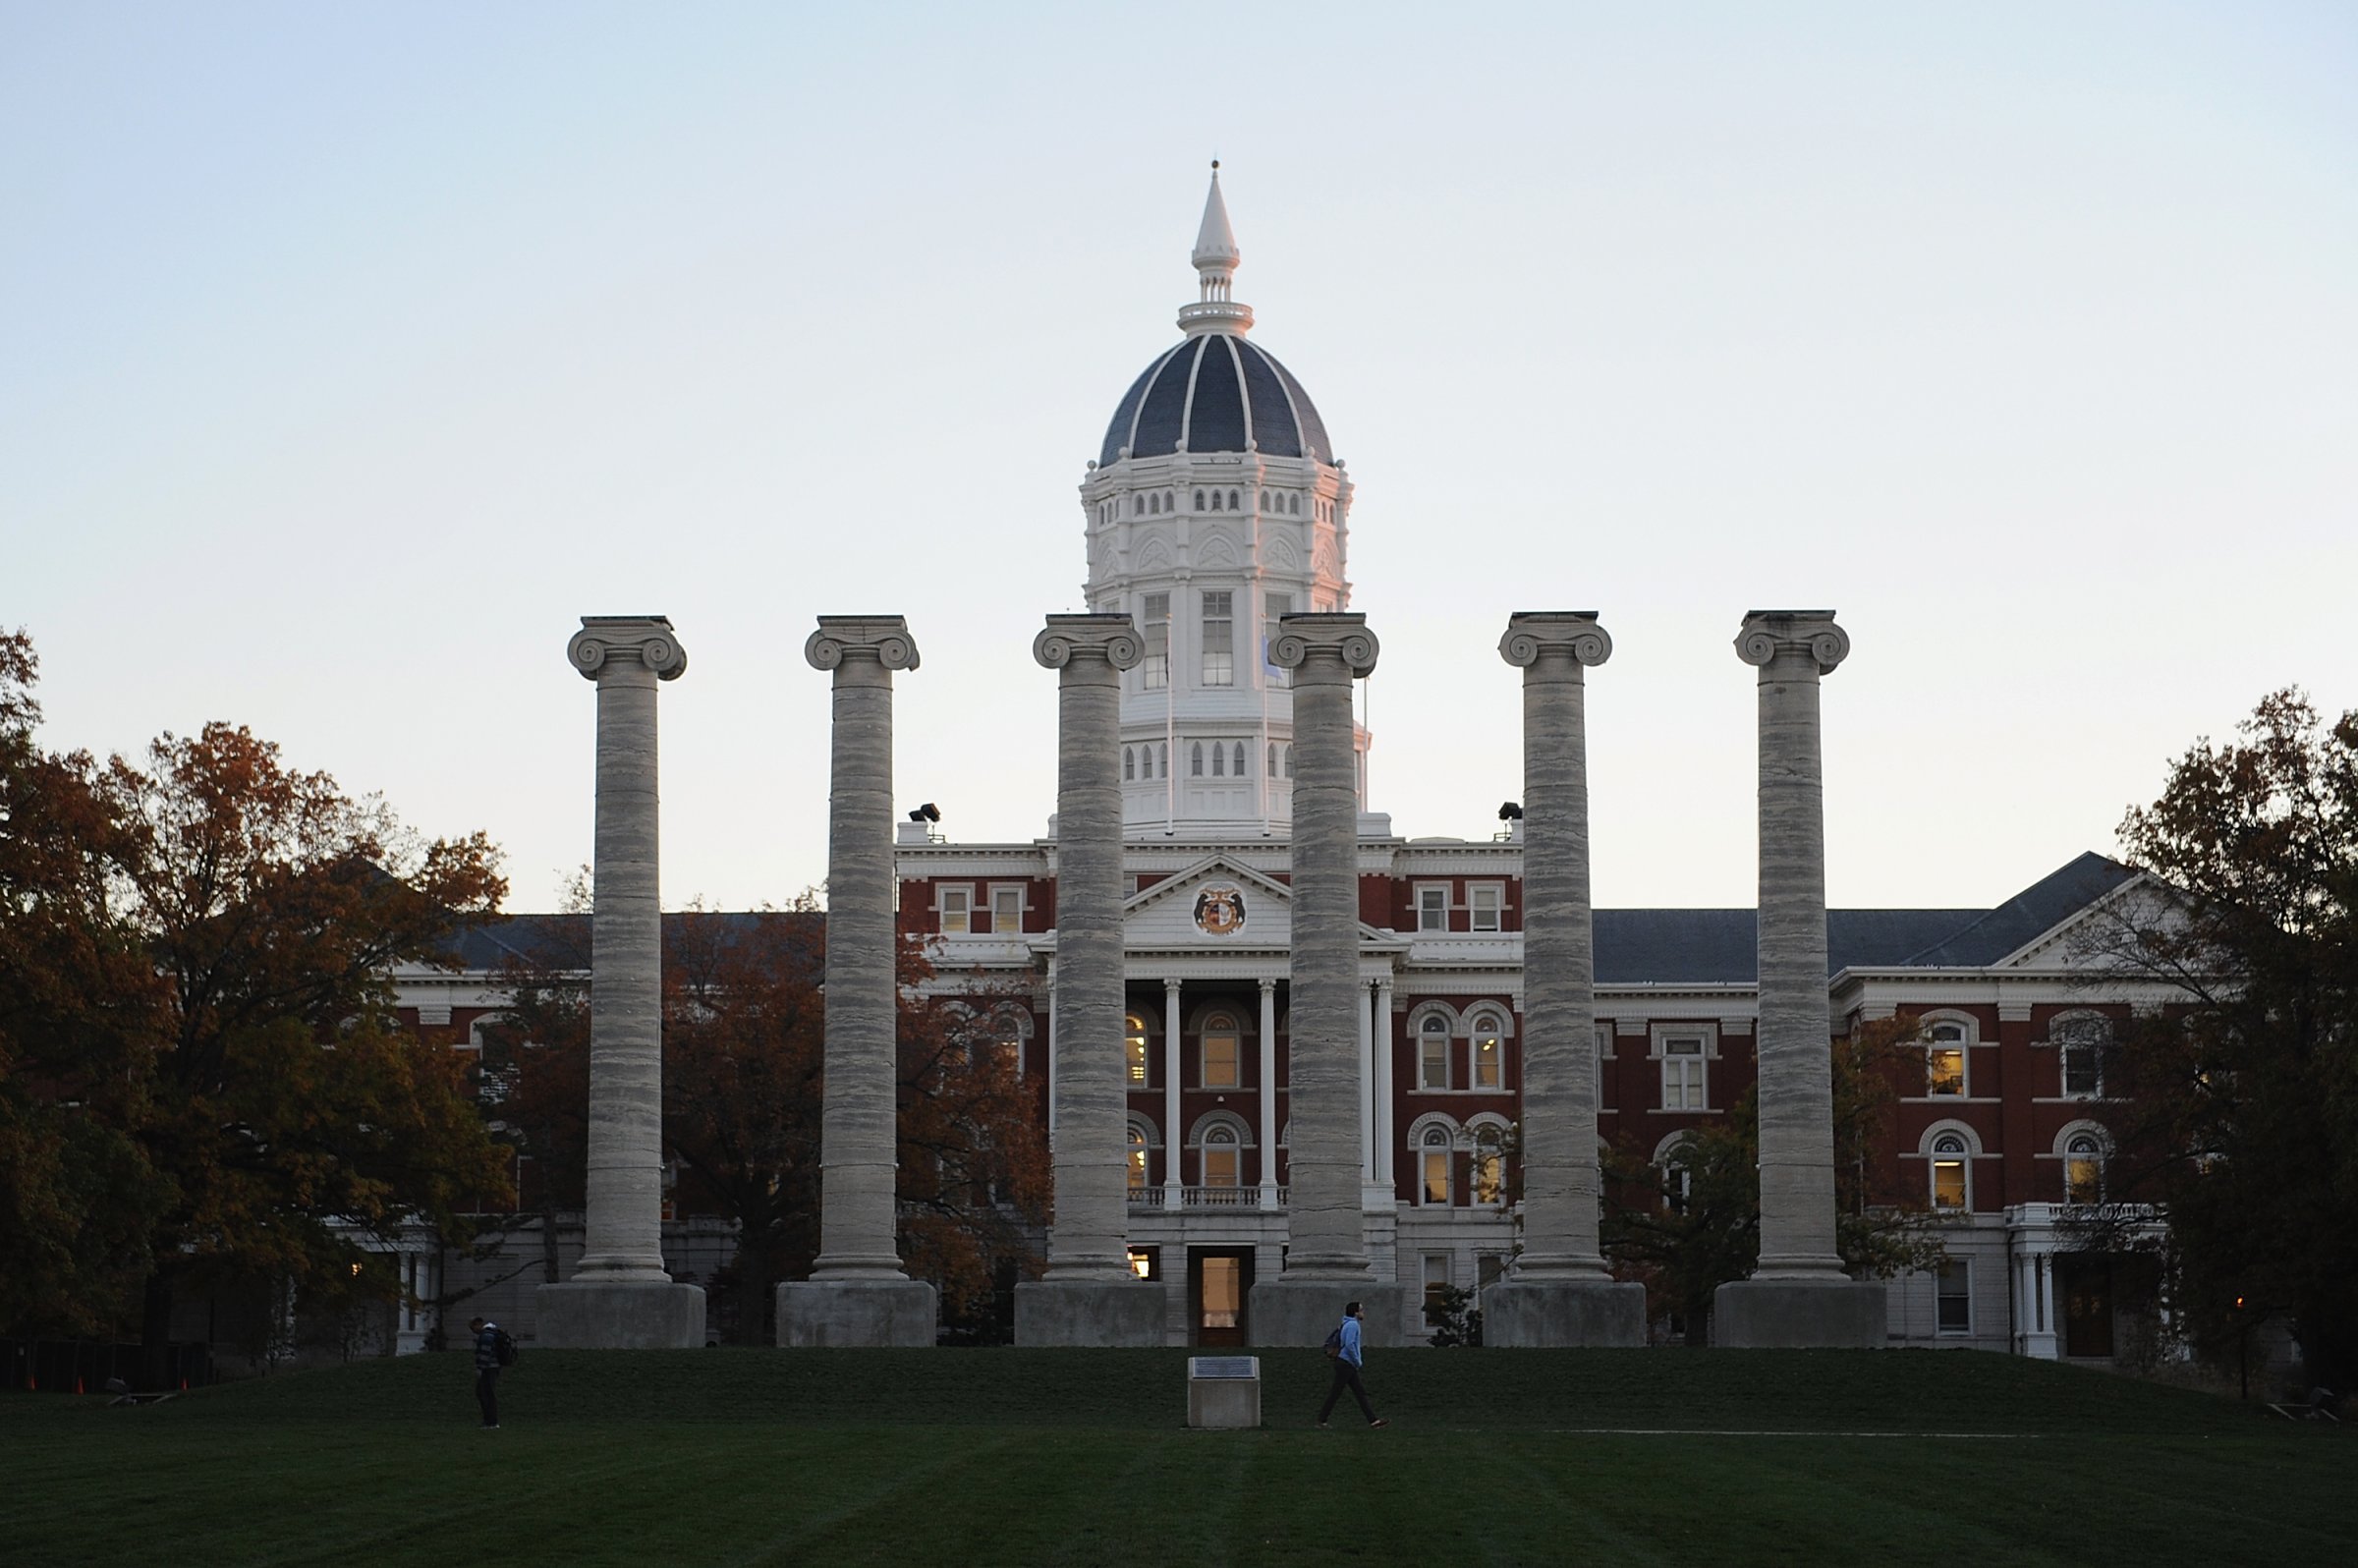 Academic Hall on the campus of University of Missouri, the author's alma mater.